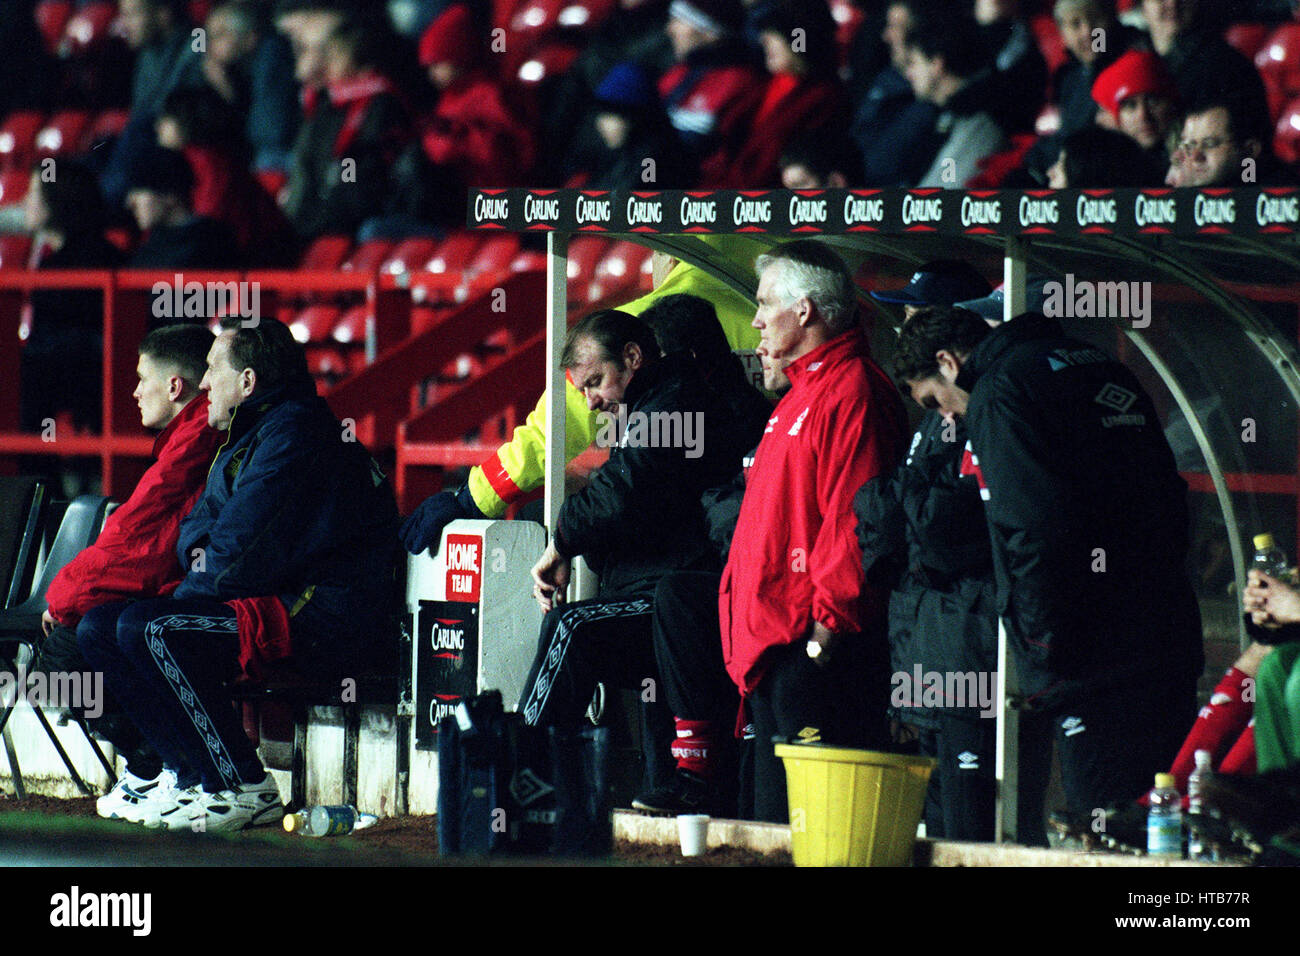 DAVE BASSET LOOKS DOWN & OUT NOTTINGHAM FOREST V PORTSMOUTH 03 January ...